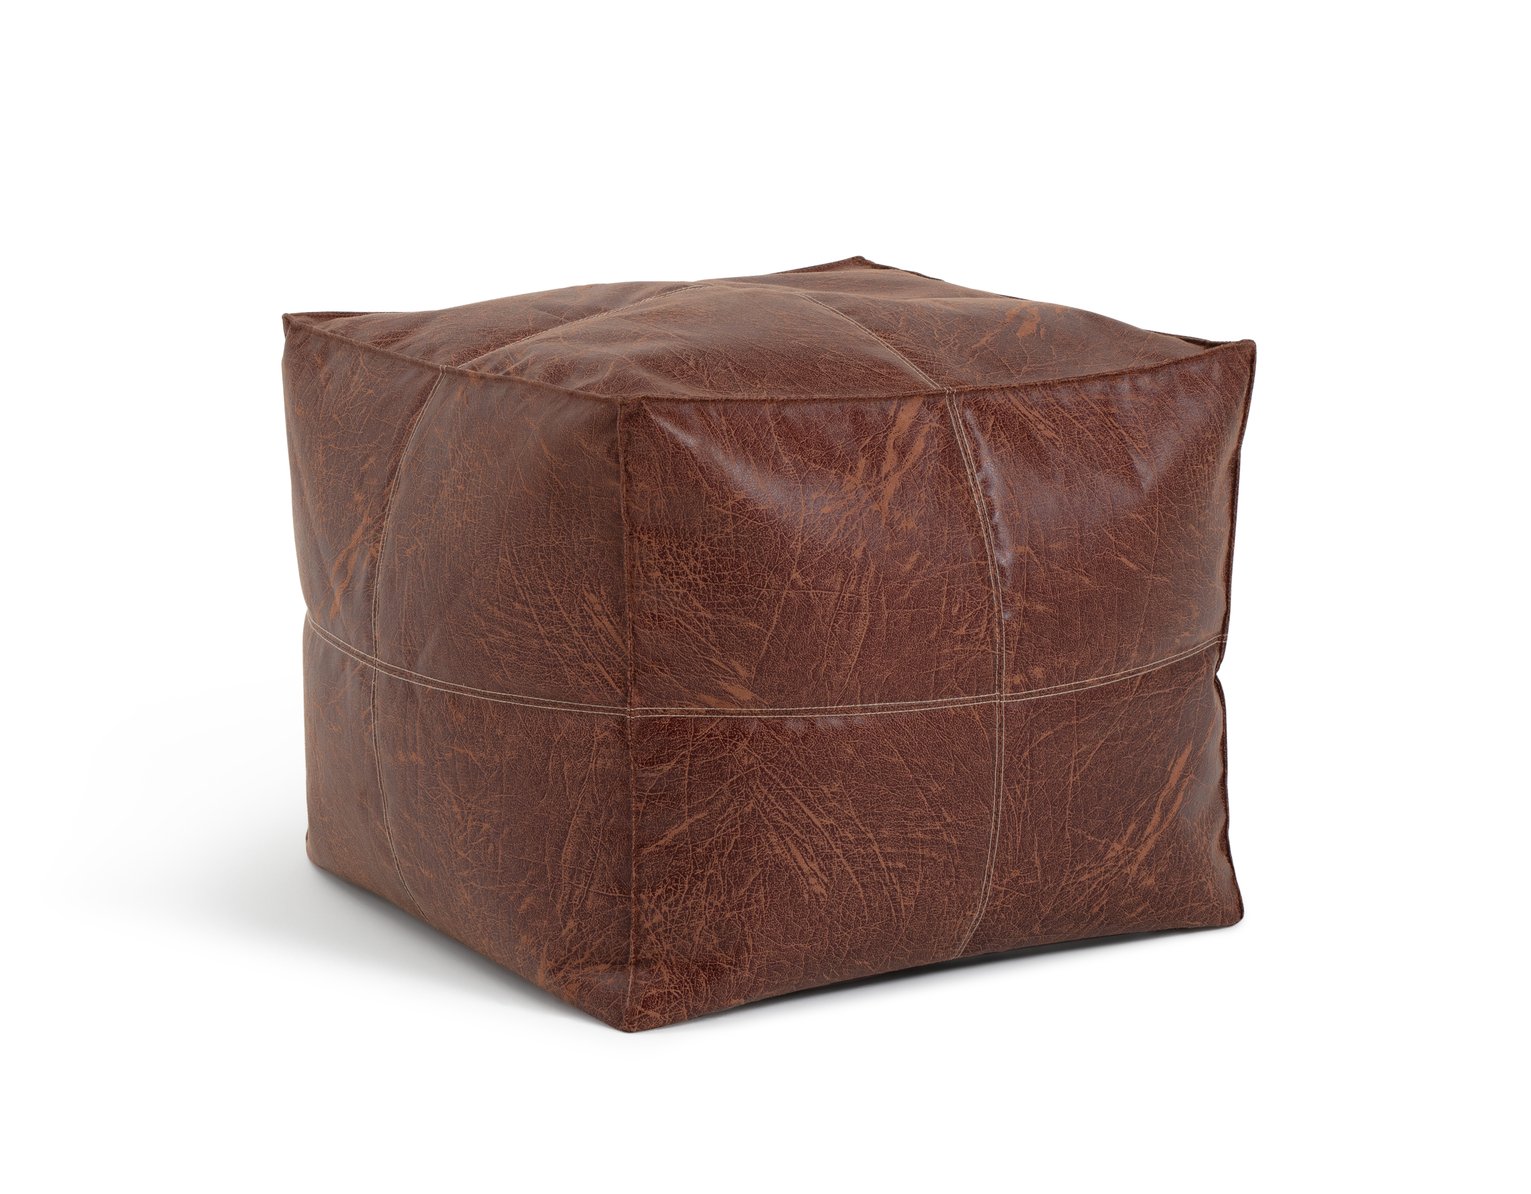 Kaikoo Faux Leather Footstool - Brown